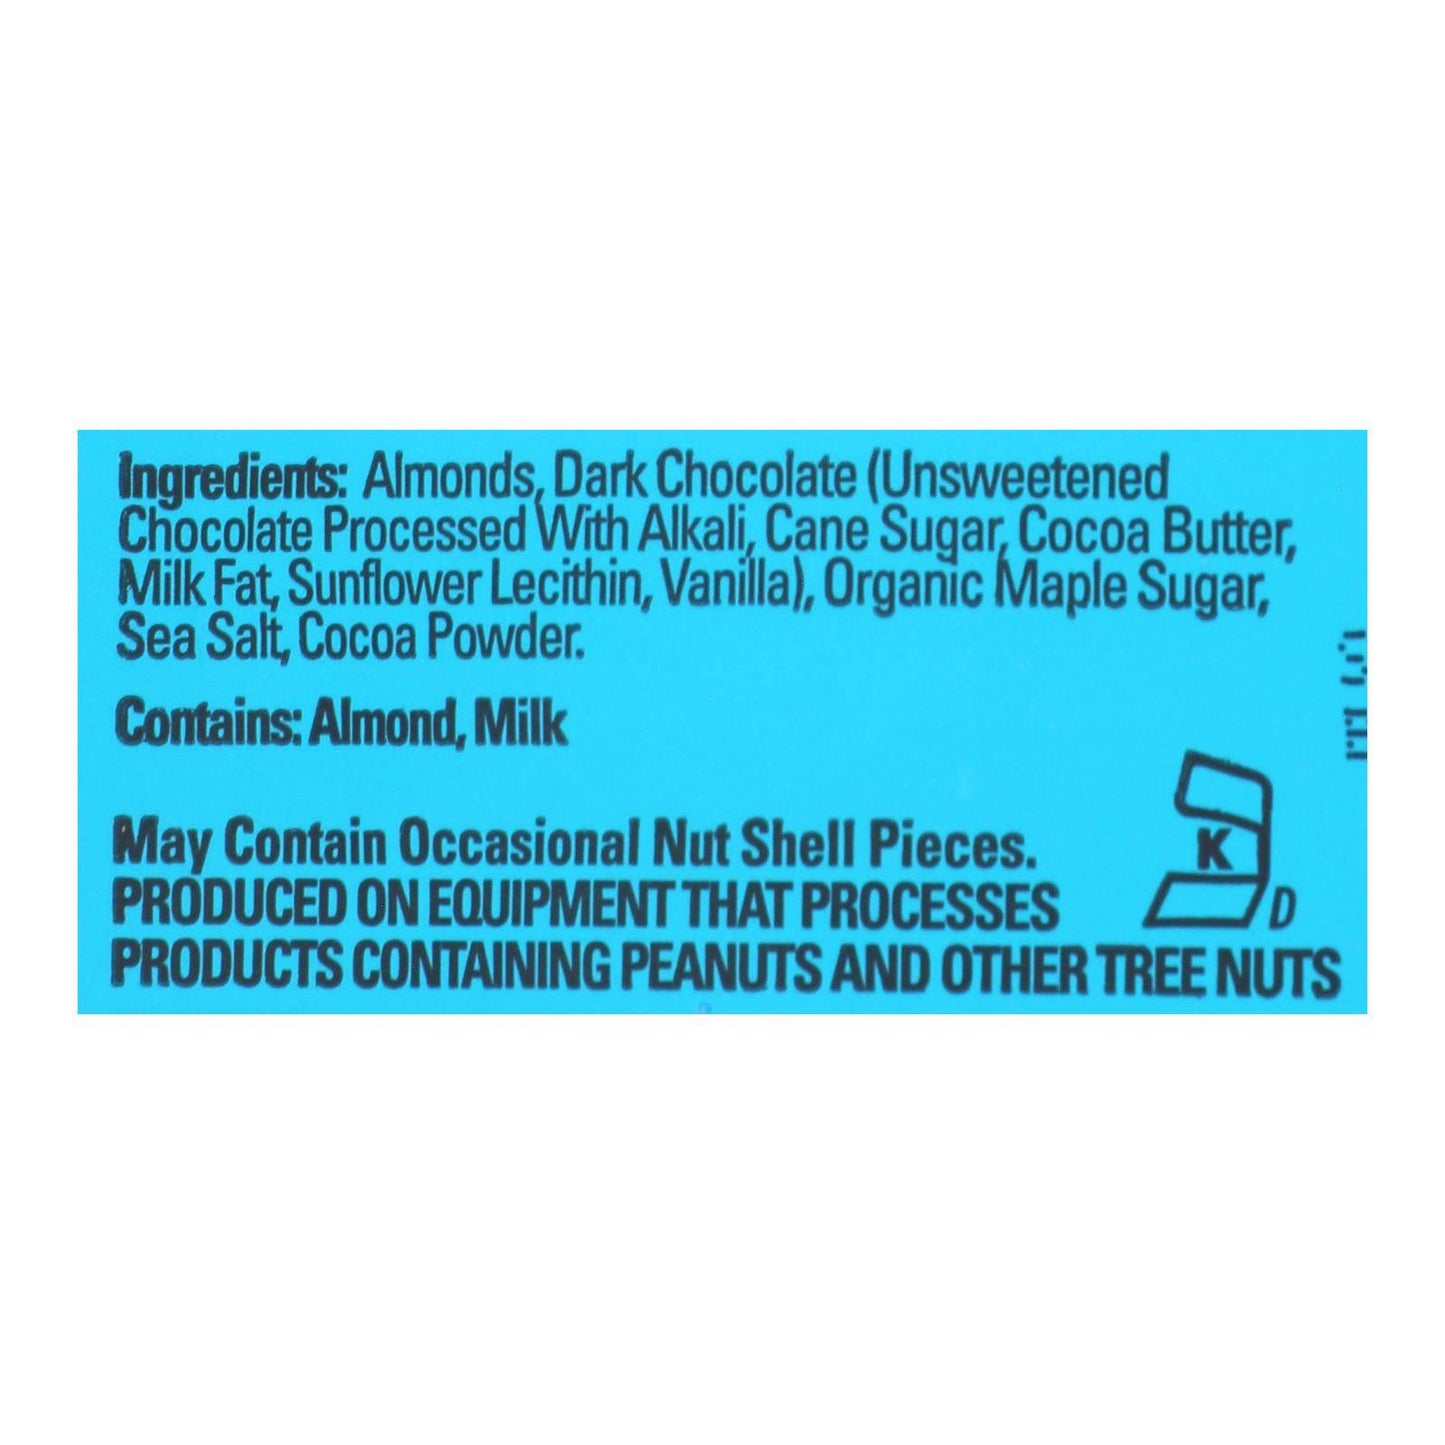 Buy Skinny Dipped Almonds - Dark Chocolate Cocoa - Case Of 10 - 3.5 Oz  at OnlyNaturals.us